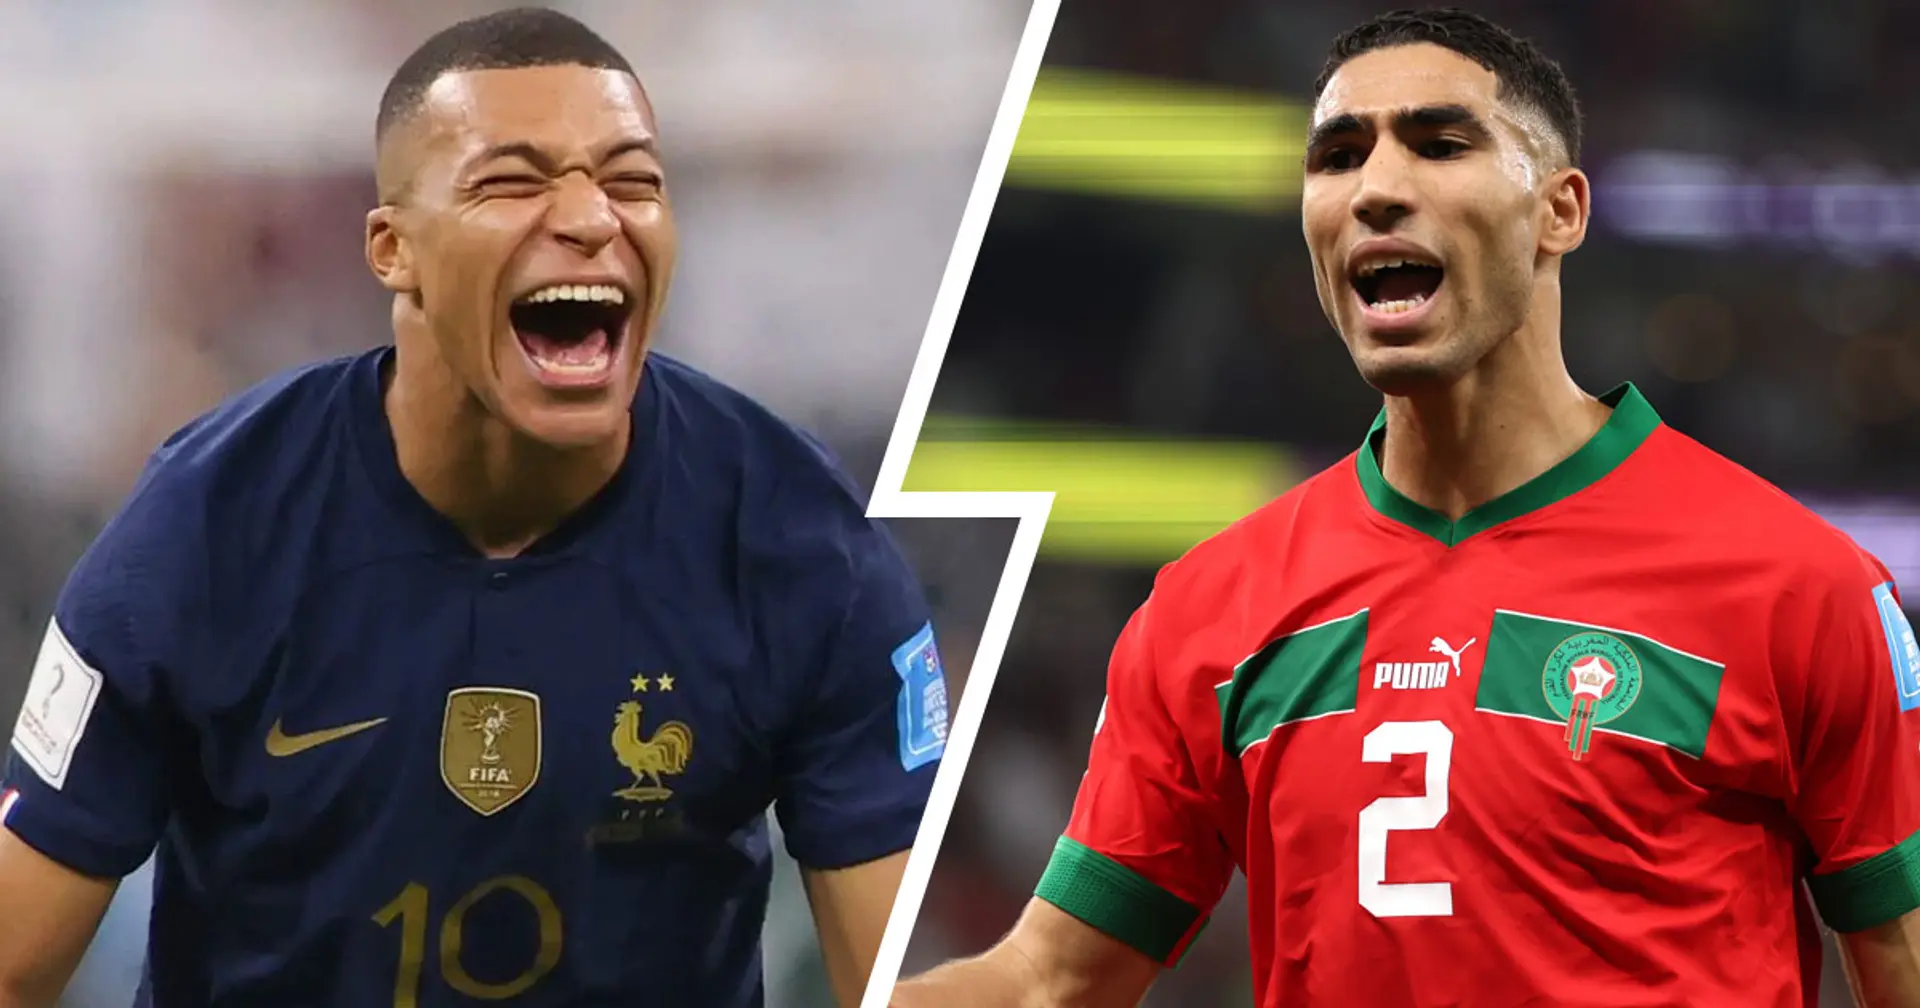 France vs Morocco: Official team lineups for World Cup semi-finals revealed